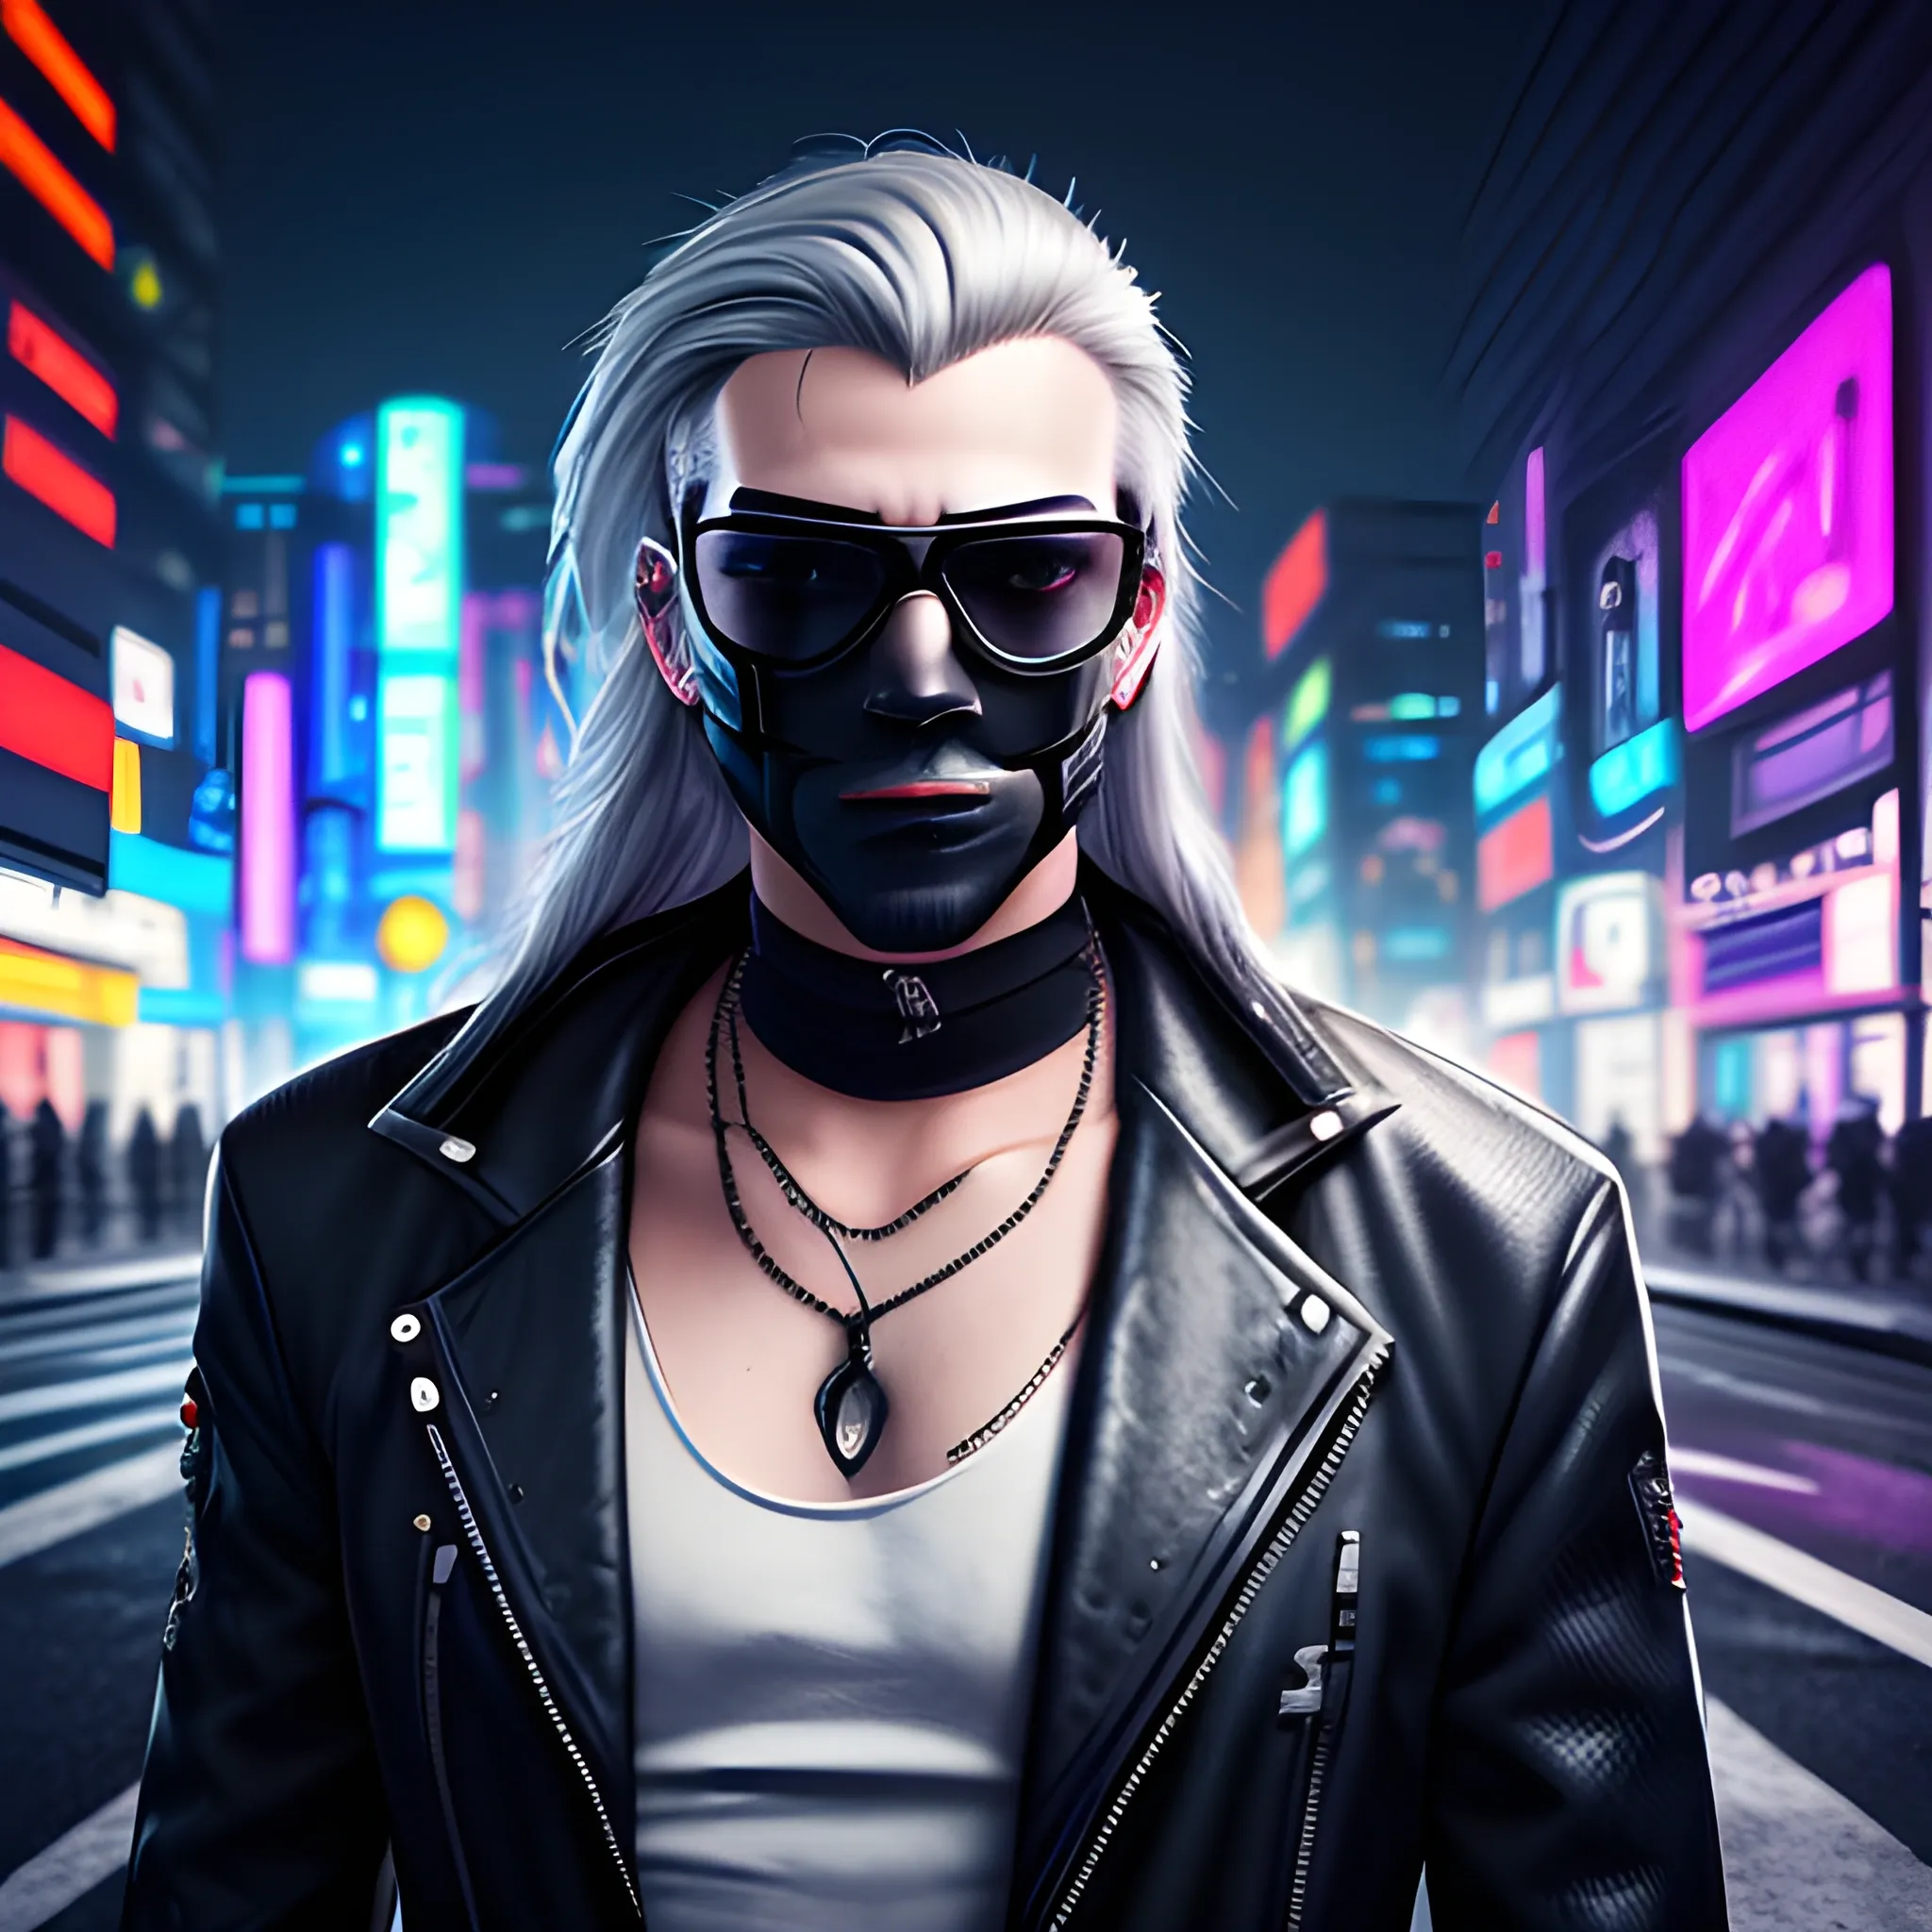 portrait of a handsome Cyberpunk male, with long silver hair pulled back. Wearing a black mask and sunglasses in a night time cyberpunk city street.